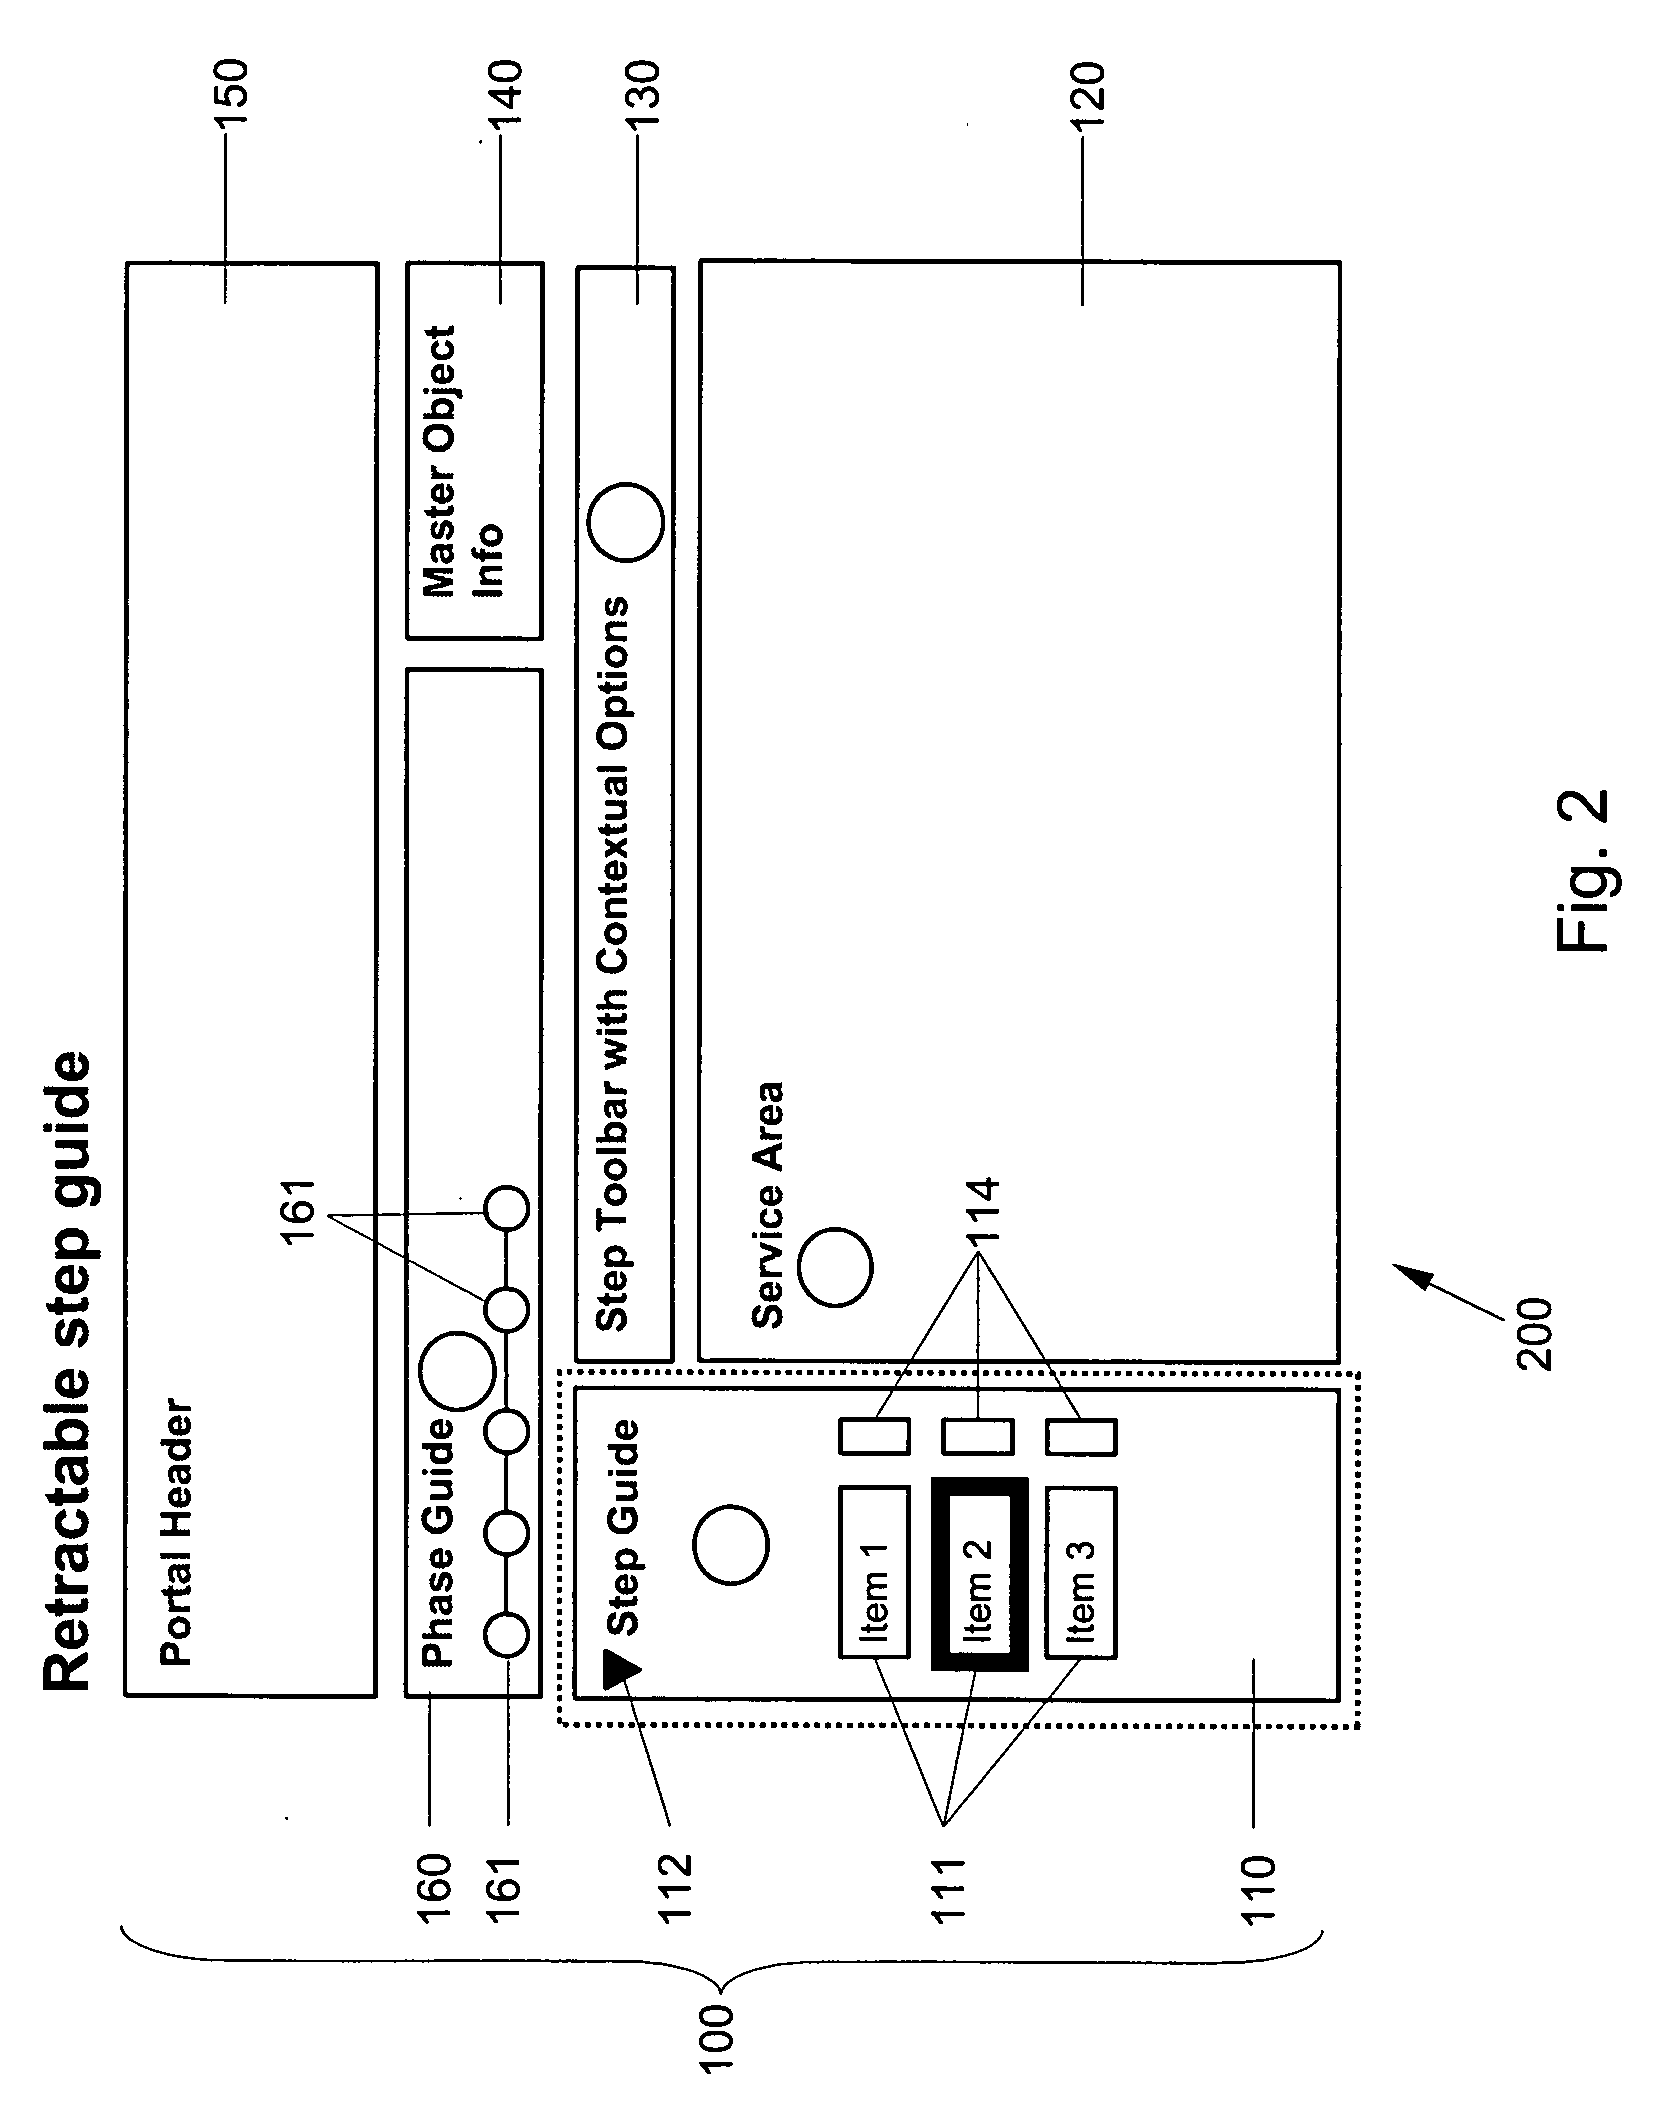 Methods and systems for manipulating an item interface